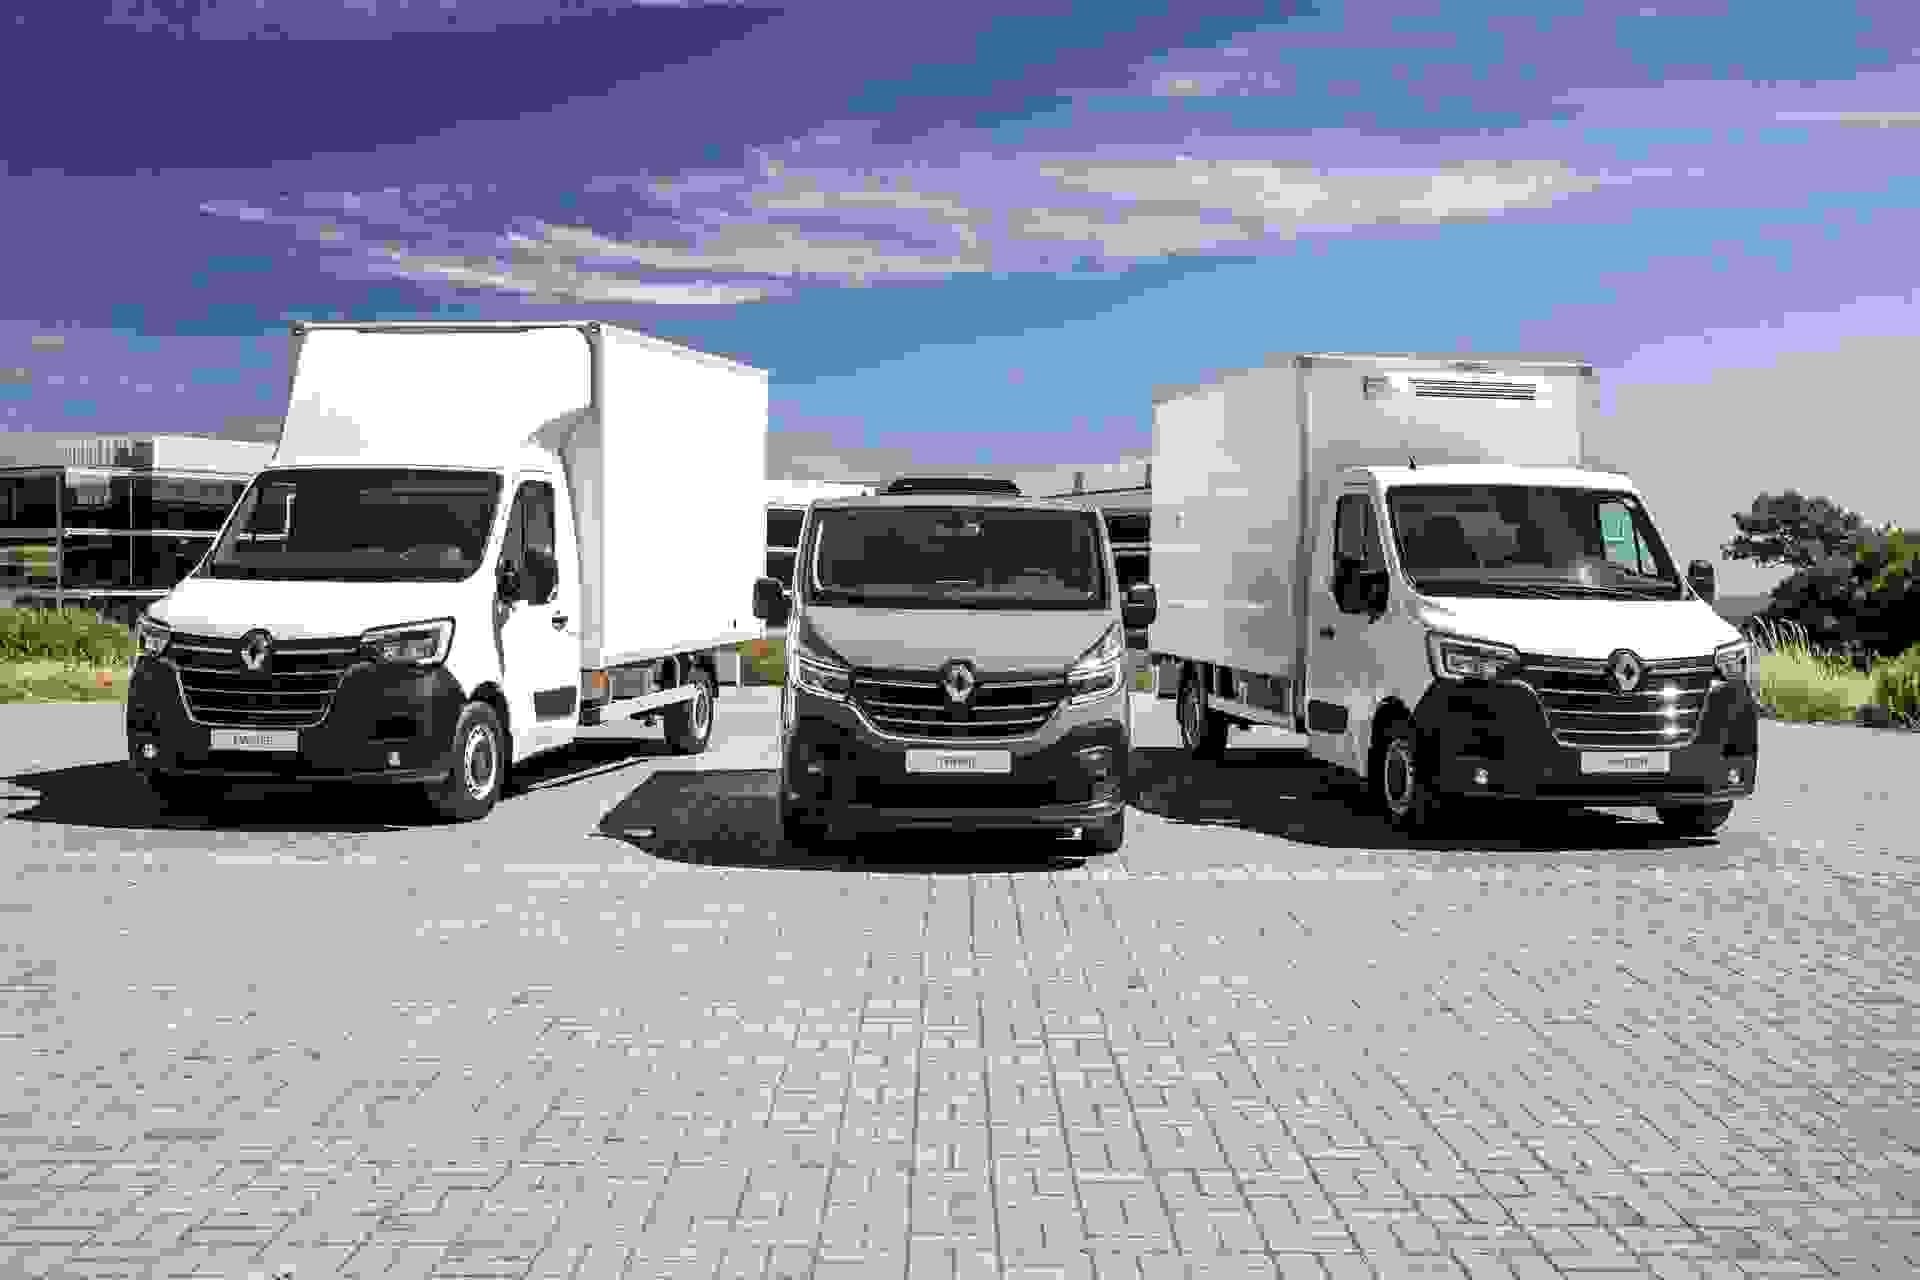 3 2019 New Renault MASTER And New Renault TRAFIC